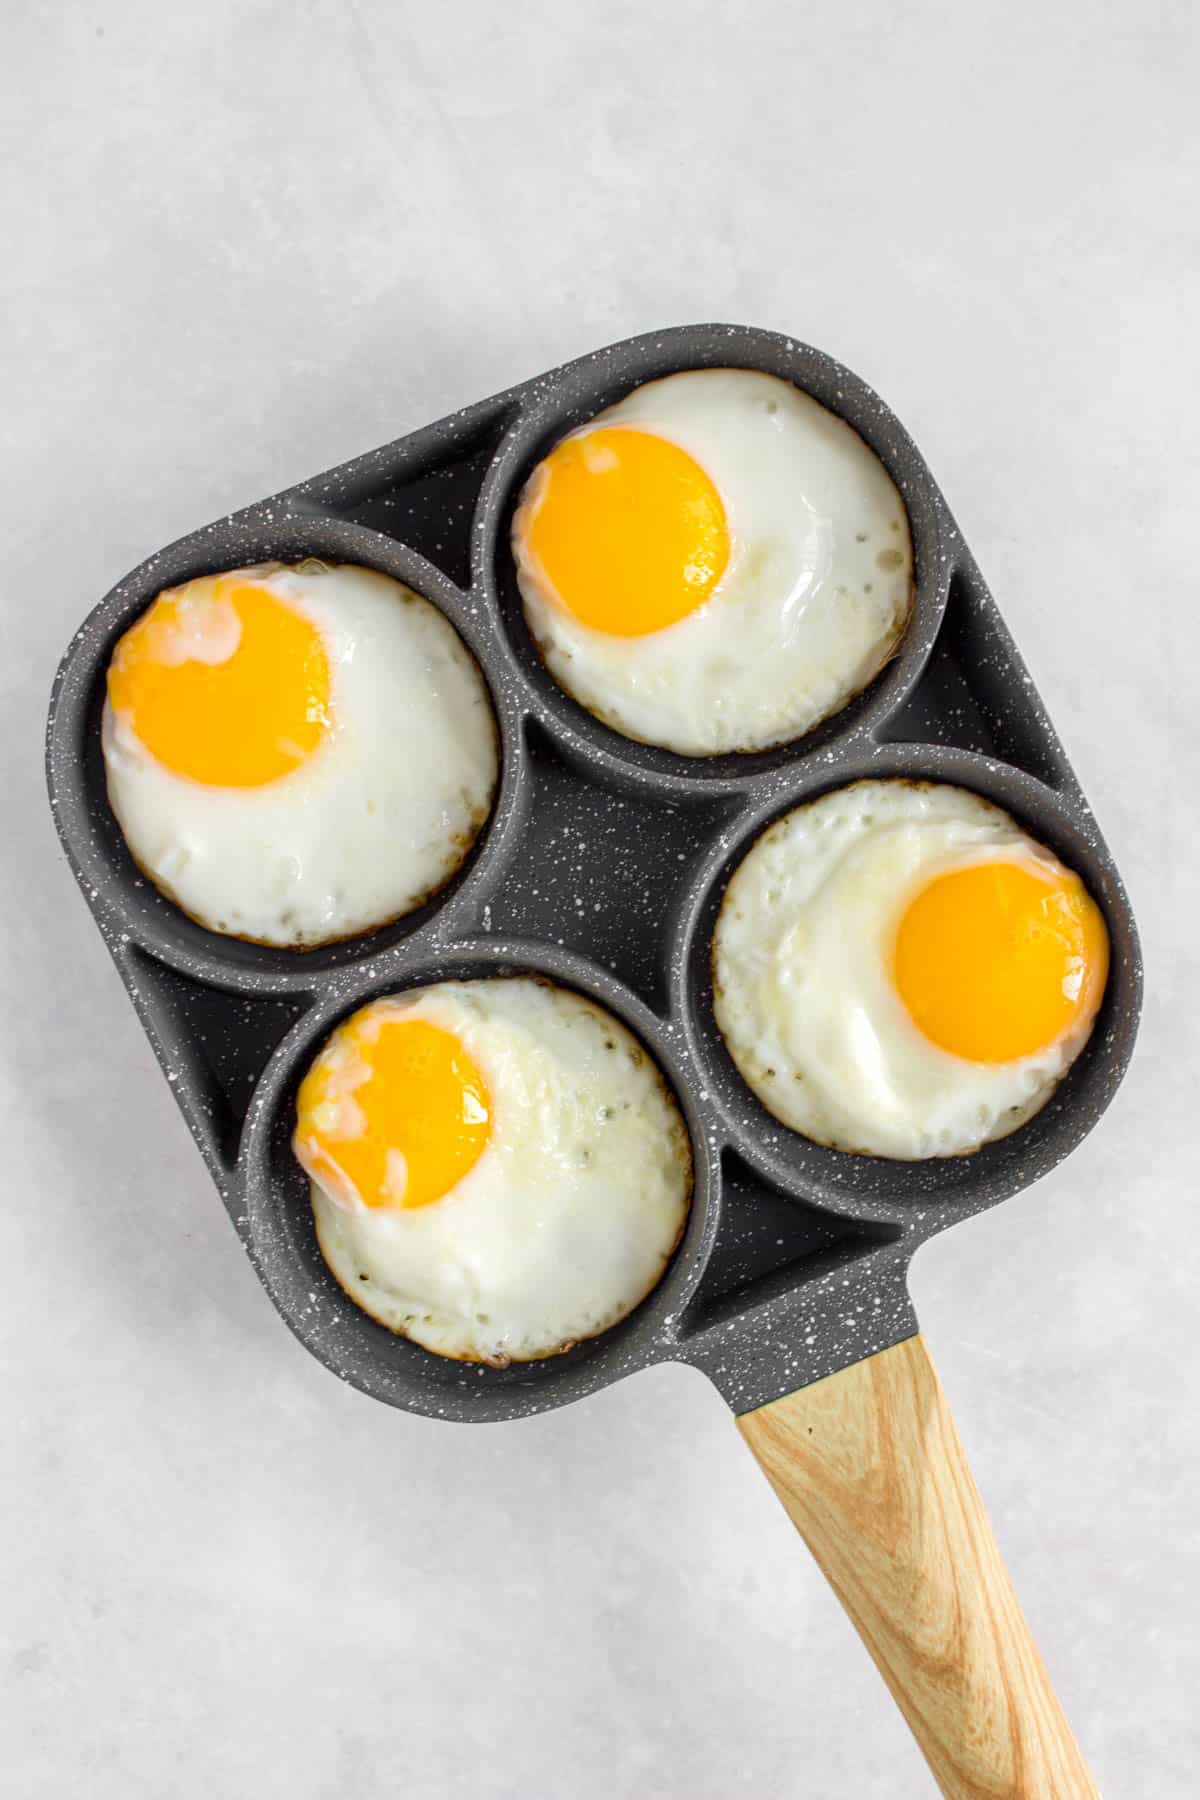 Fried sunny side up eggs in a pan.